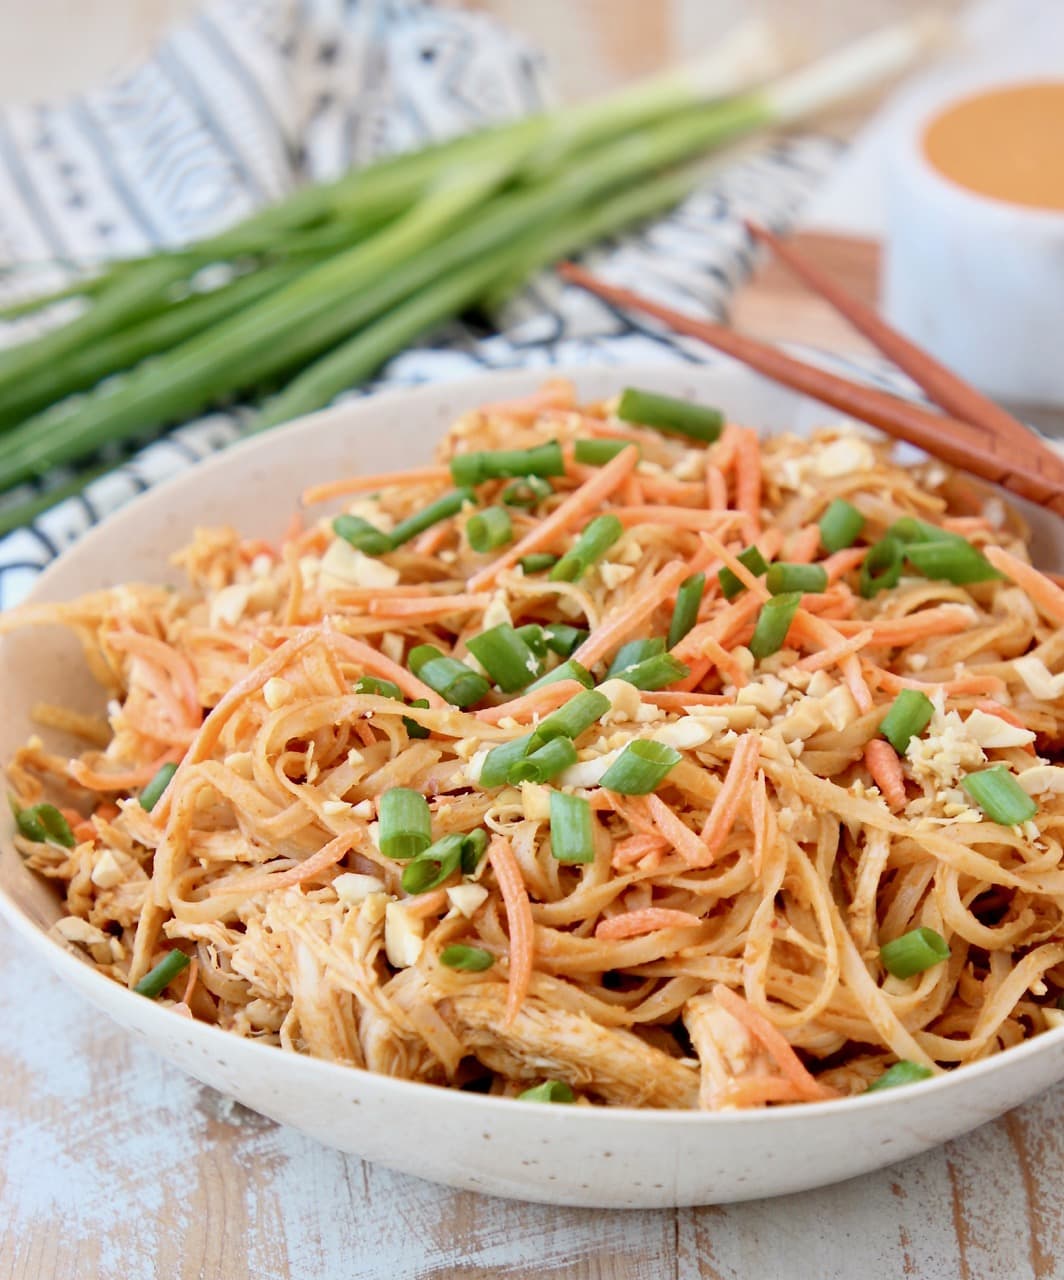 Pressure cooker Thai Peanut Chicken Noodles with shredded carrots, peanuts and scallions